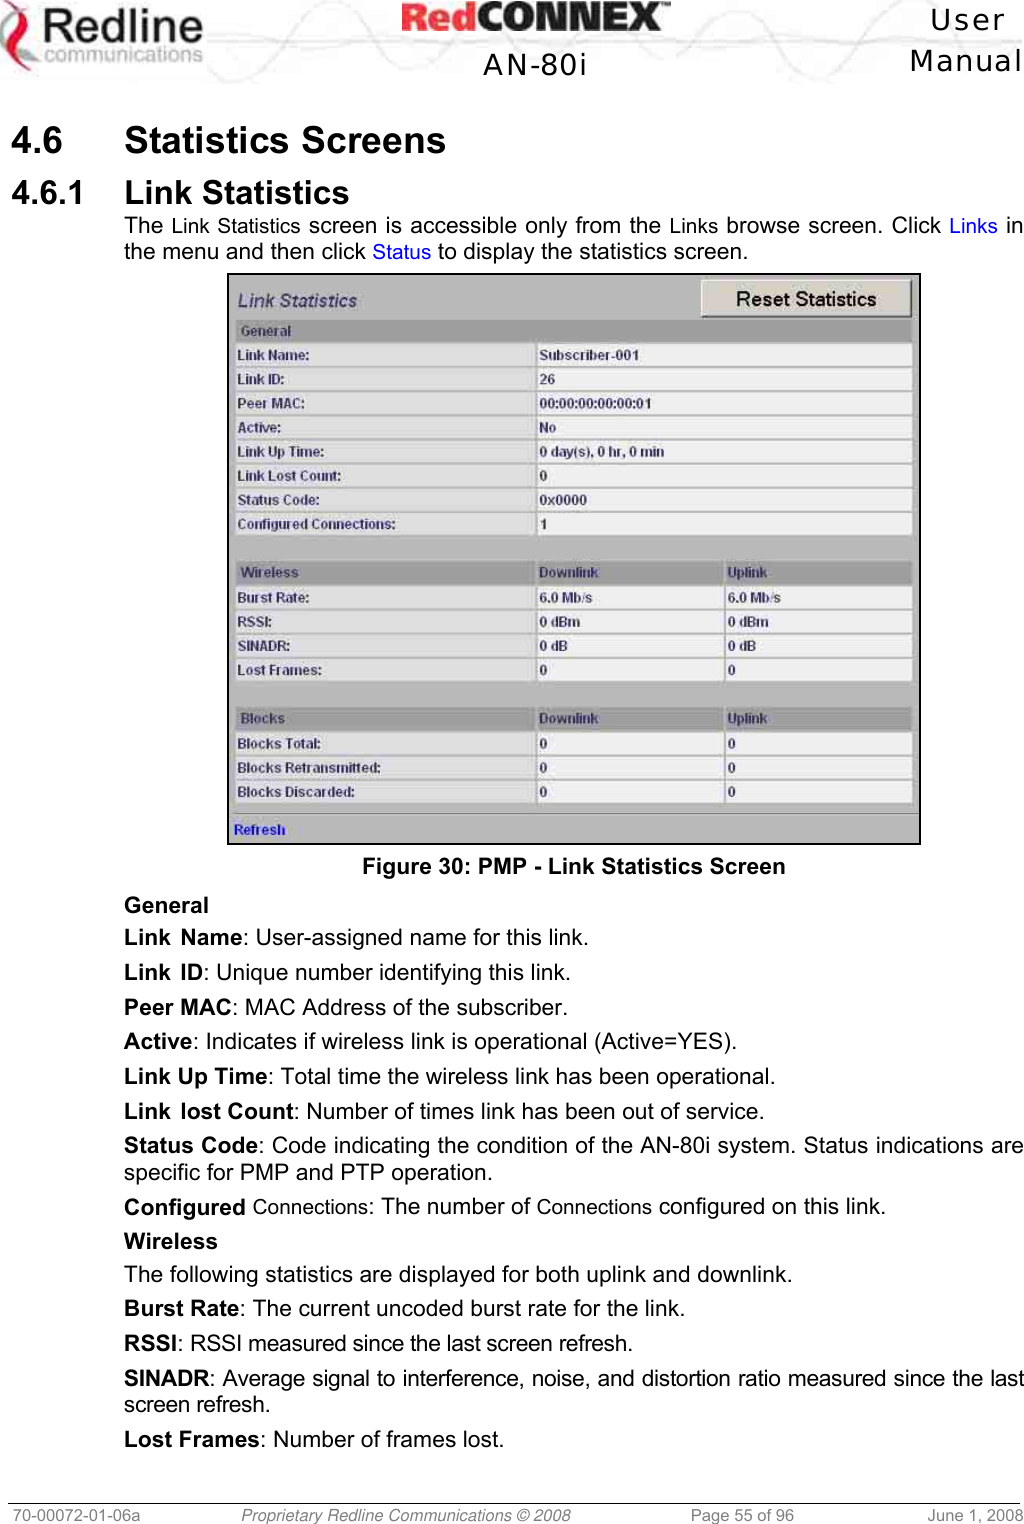   User  AN-80i Manual  70-00072-01-06a  Proprietary Redline Communications © 2008  Page 55 of 96  June 1, 2008  4.6 Statistics Screens 4.6.1 Link Statistics The Link Statistics screen is accessible only from the Links browse screen. Click Links in the menu and then click Status to display the statistics screen.   Figure 30: PMP - Link Statistics Screen General Link Name: User-assigned name for this link. Link ID: Unique number identifying this link. Peer MAC: MAC Address of the subscriber. Active: Indicates if wireless link is operational (Active=YES). Link Up Time: Total time the wireless link has been operational. Link lost Count: Number of times link has been out of service. Status Code: Code indicating the condition of the AN-80i system. Status indications are specific for PMP and PTP operation.  Configured Connections: The number of Connections configured on this link. Wireless The following statistics are displayed for both uplink and downlink. Burst Rate: The current uncoded burst rate for the link. RSSI: RSSI measured since the last screen refresh. SINADR: Average signal to interference, noise, and distortion ratio measured since the last screen refresh. Lost Frames: Number of frames lost. 